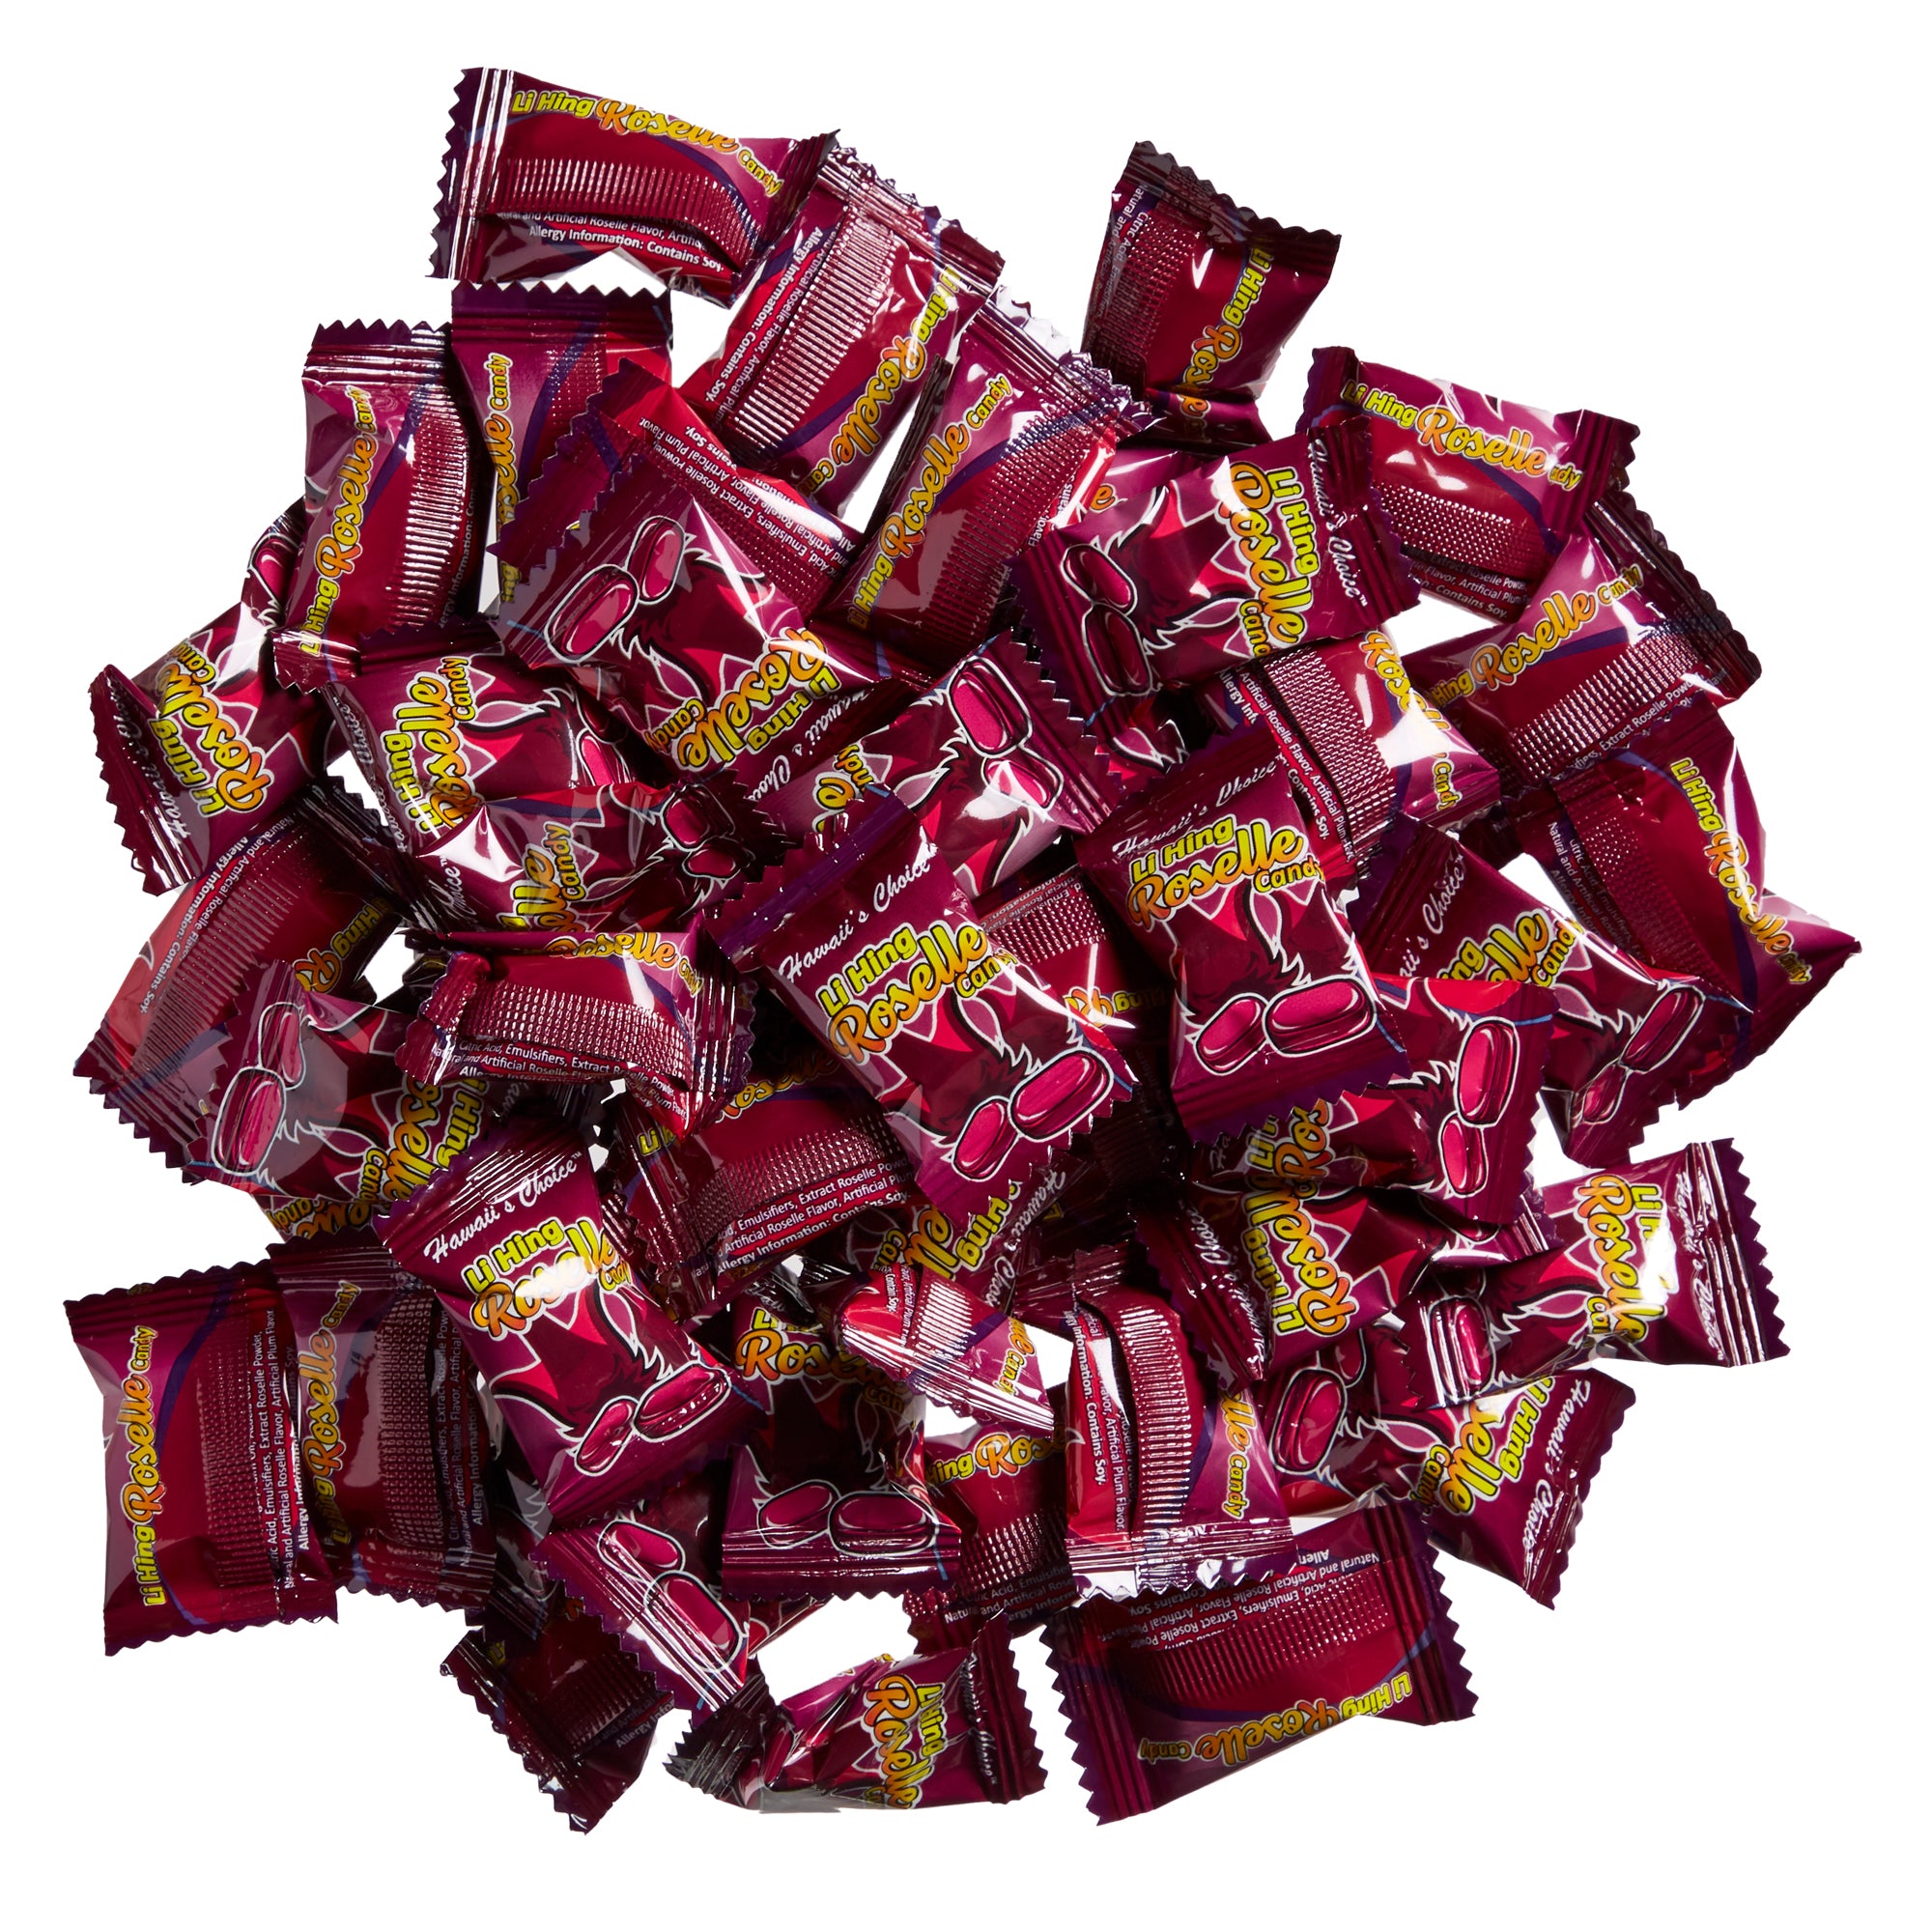 Hawaii's Choice Li Hing Roselle (Hibiscus) Flavor Chewy Candies - Individually Wrapped Candy 4.2 oz (120g) Bag - 6 Pack - Reg. $6.38/bag, 10% Special@ $5.74/bag (USD)